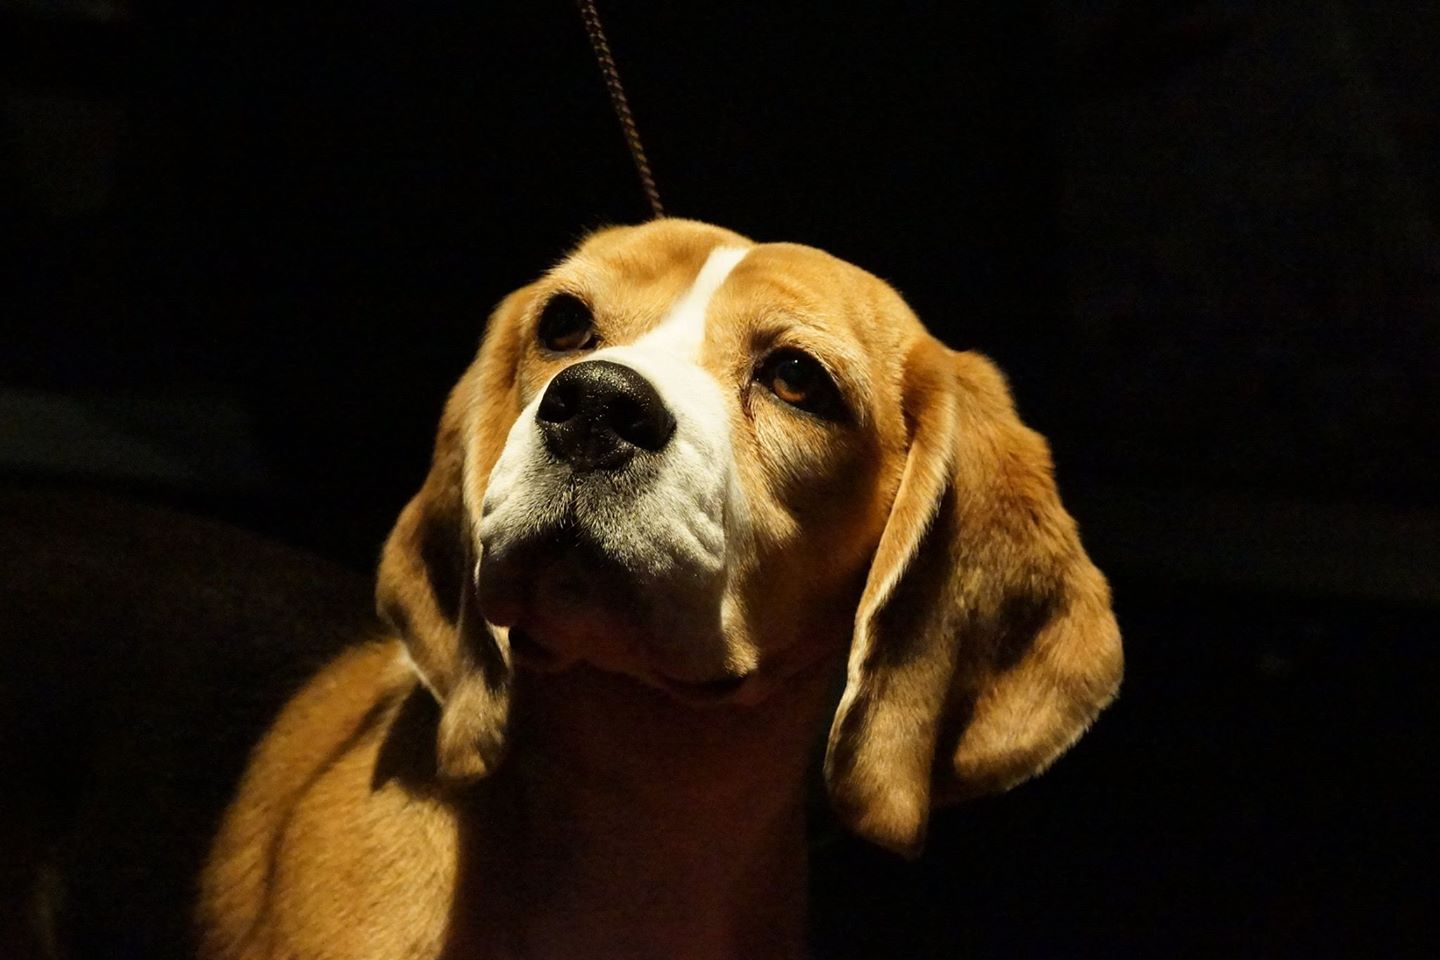 Beagle, Best in Show, Westminster Kennel Club Dog Show